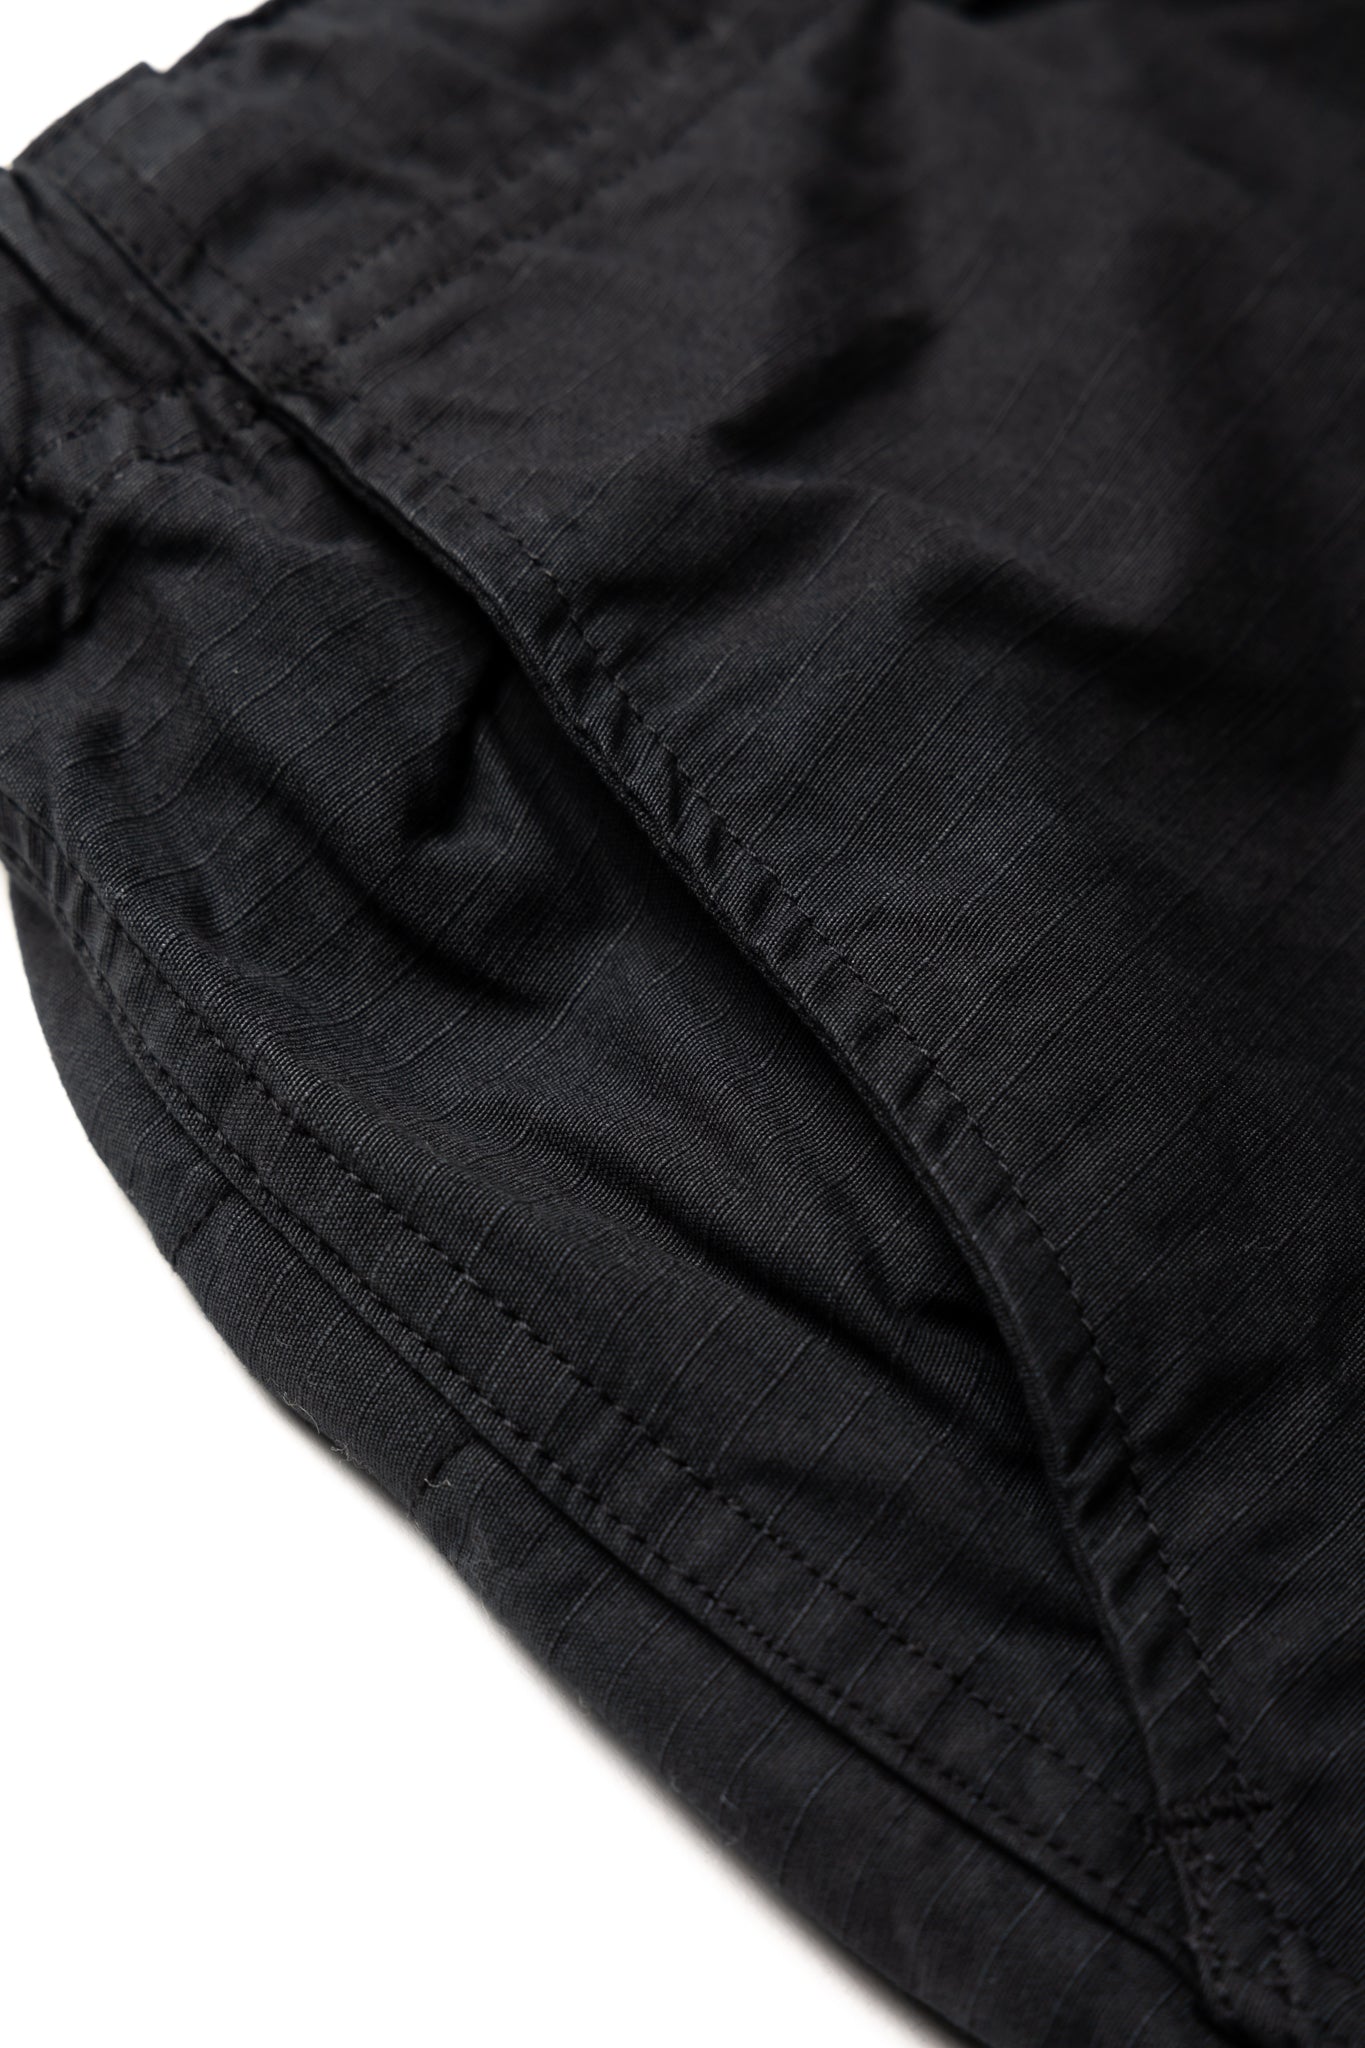 Orslow's easy to wear trousers with an elastic waist and cord drawstring made in Japan. 100% cotton ripstop fabric. Straight leg with a slight taper that features two front pockets and one back. 